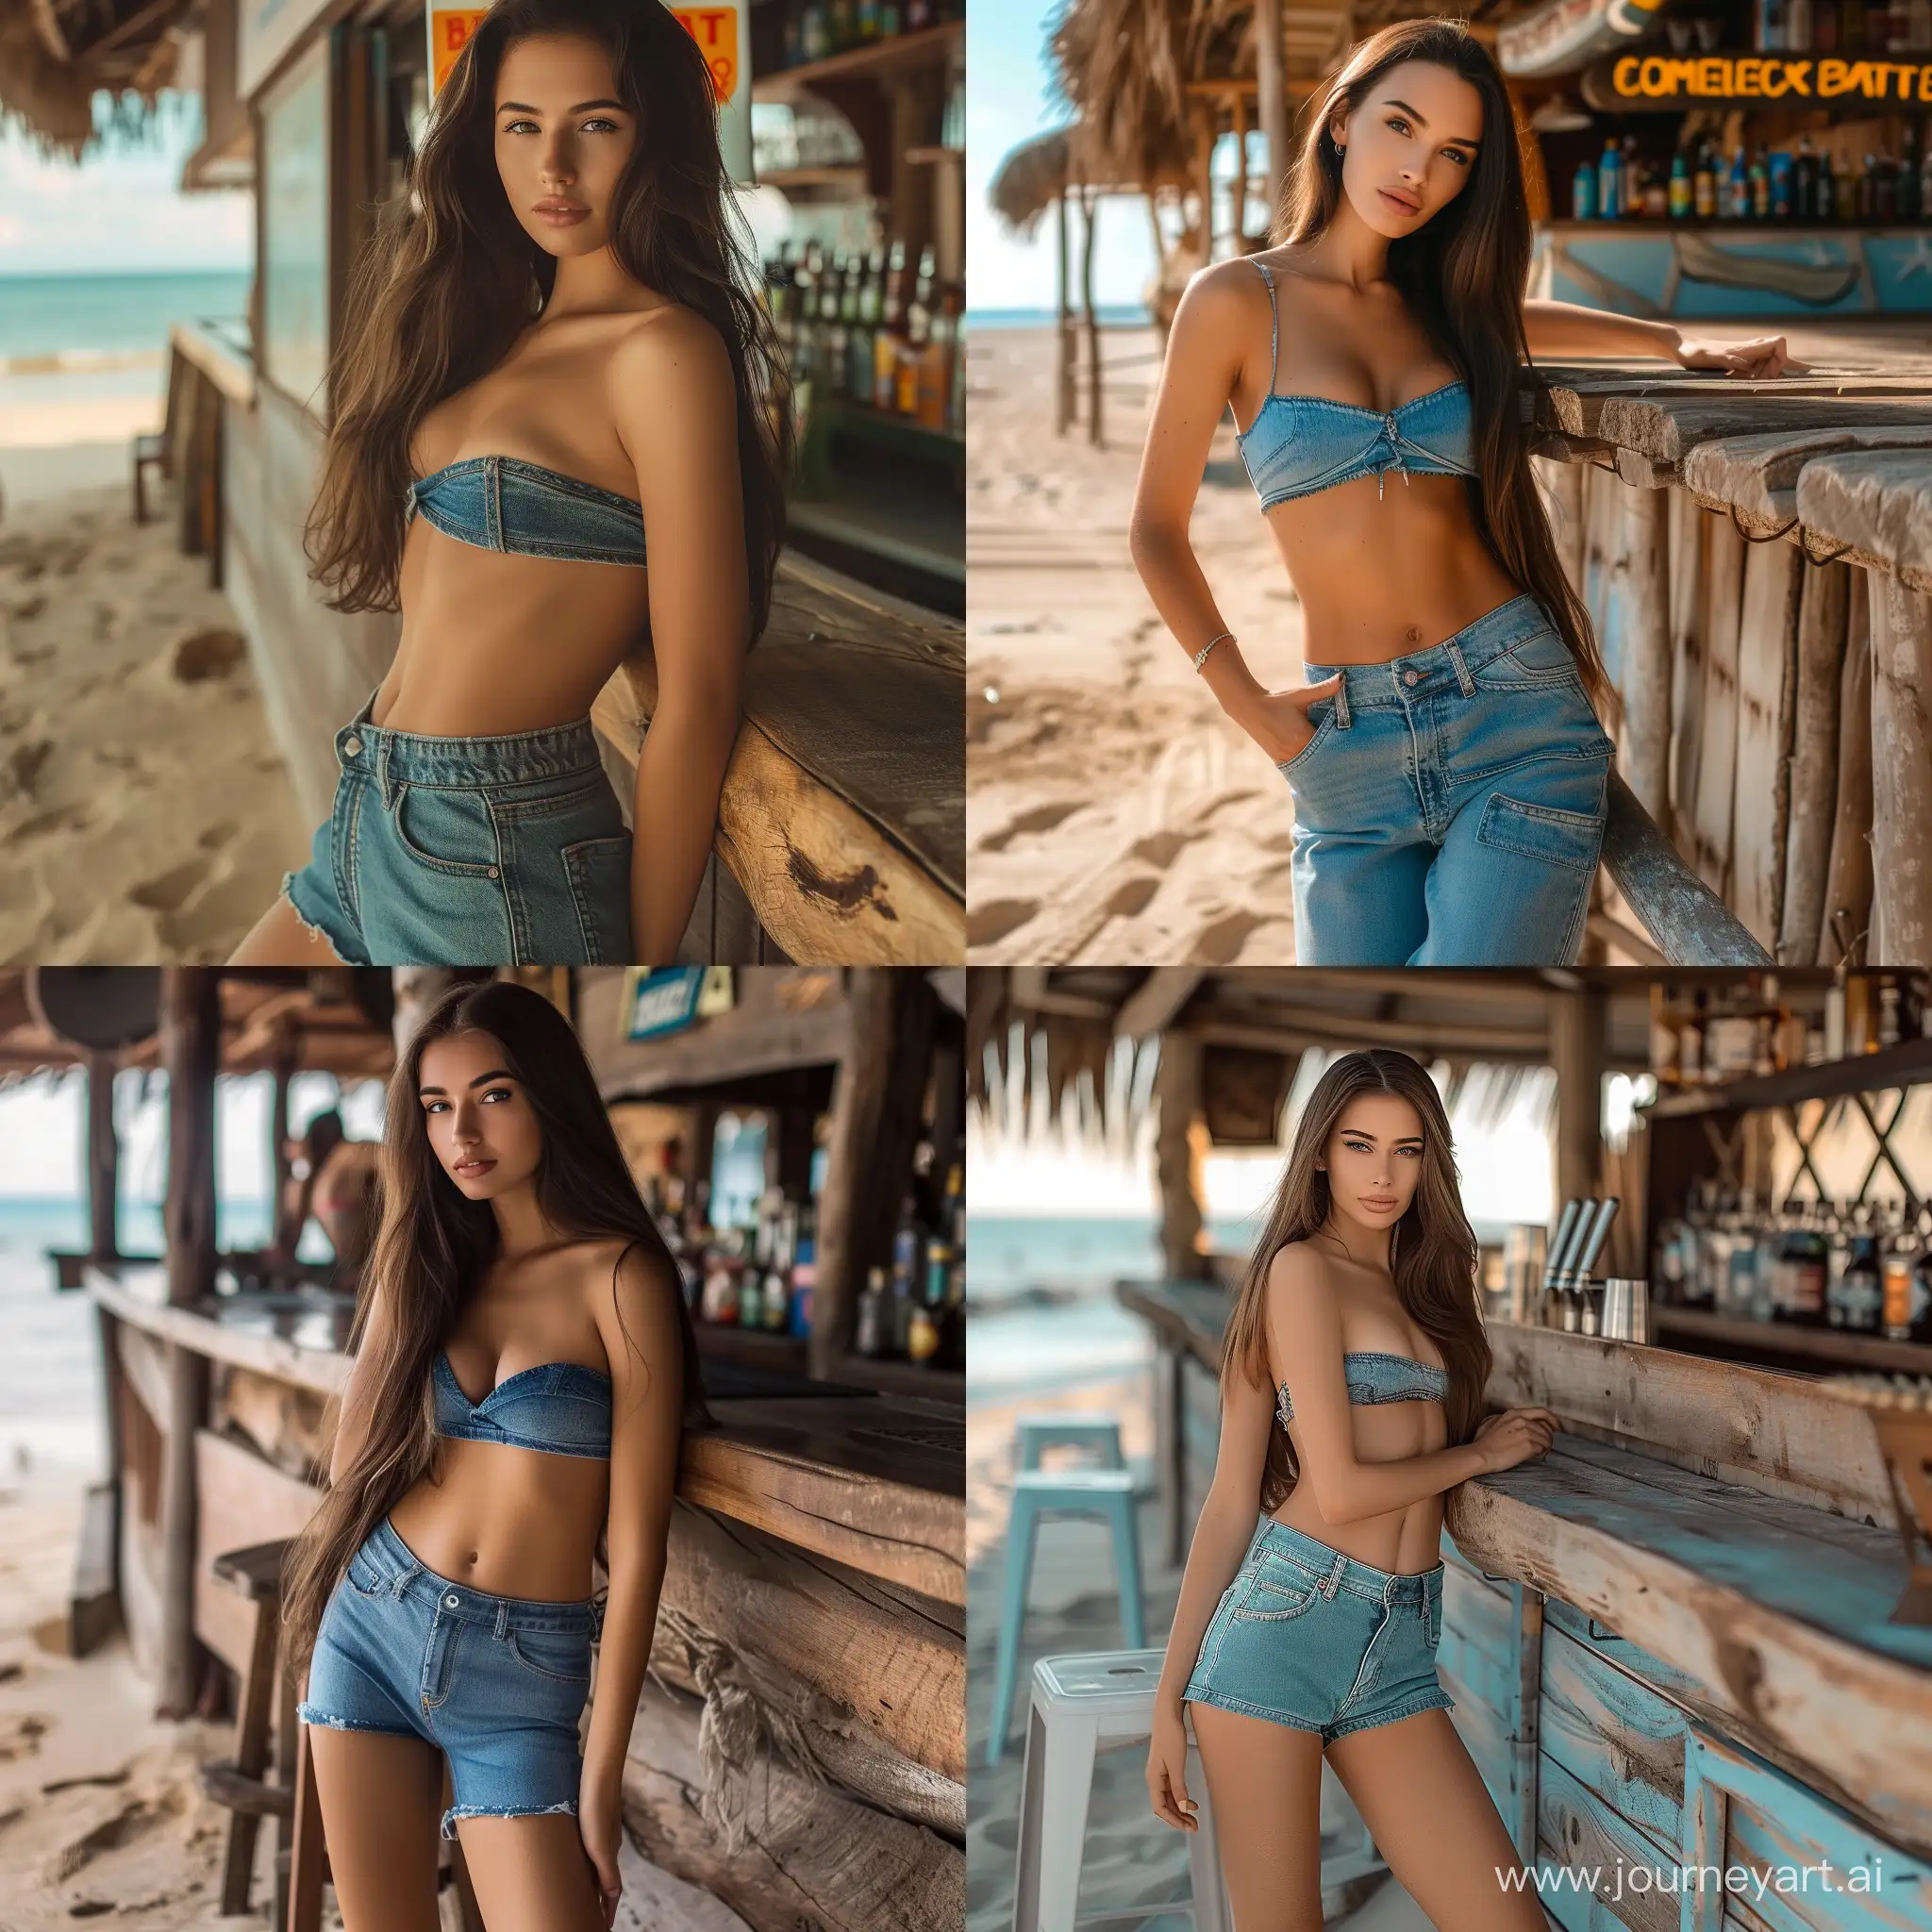 slim hour glass physique, brunette model that dose not exist in real life, wearing denim hot pants,  leaning against a beach bar